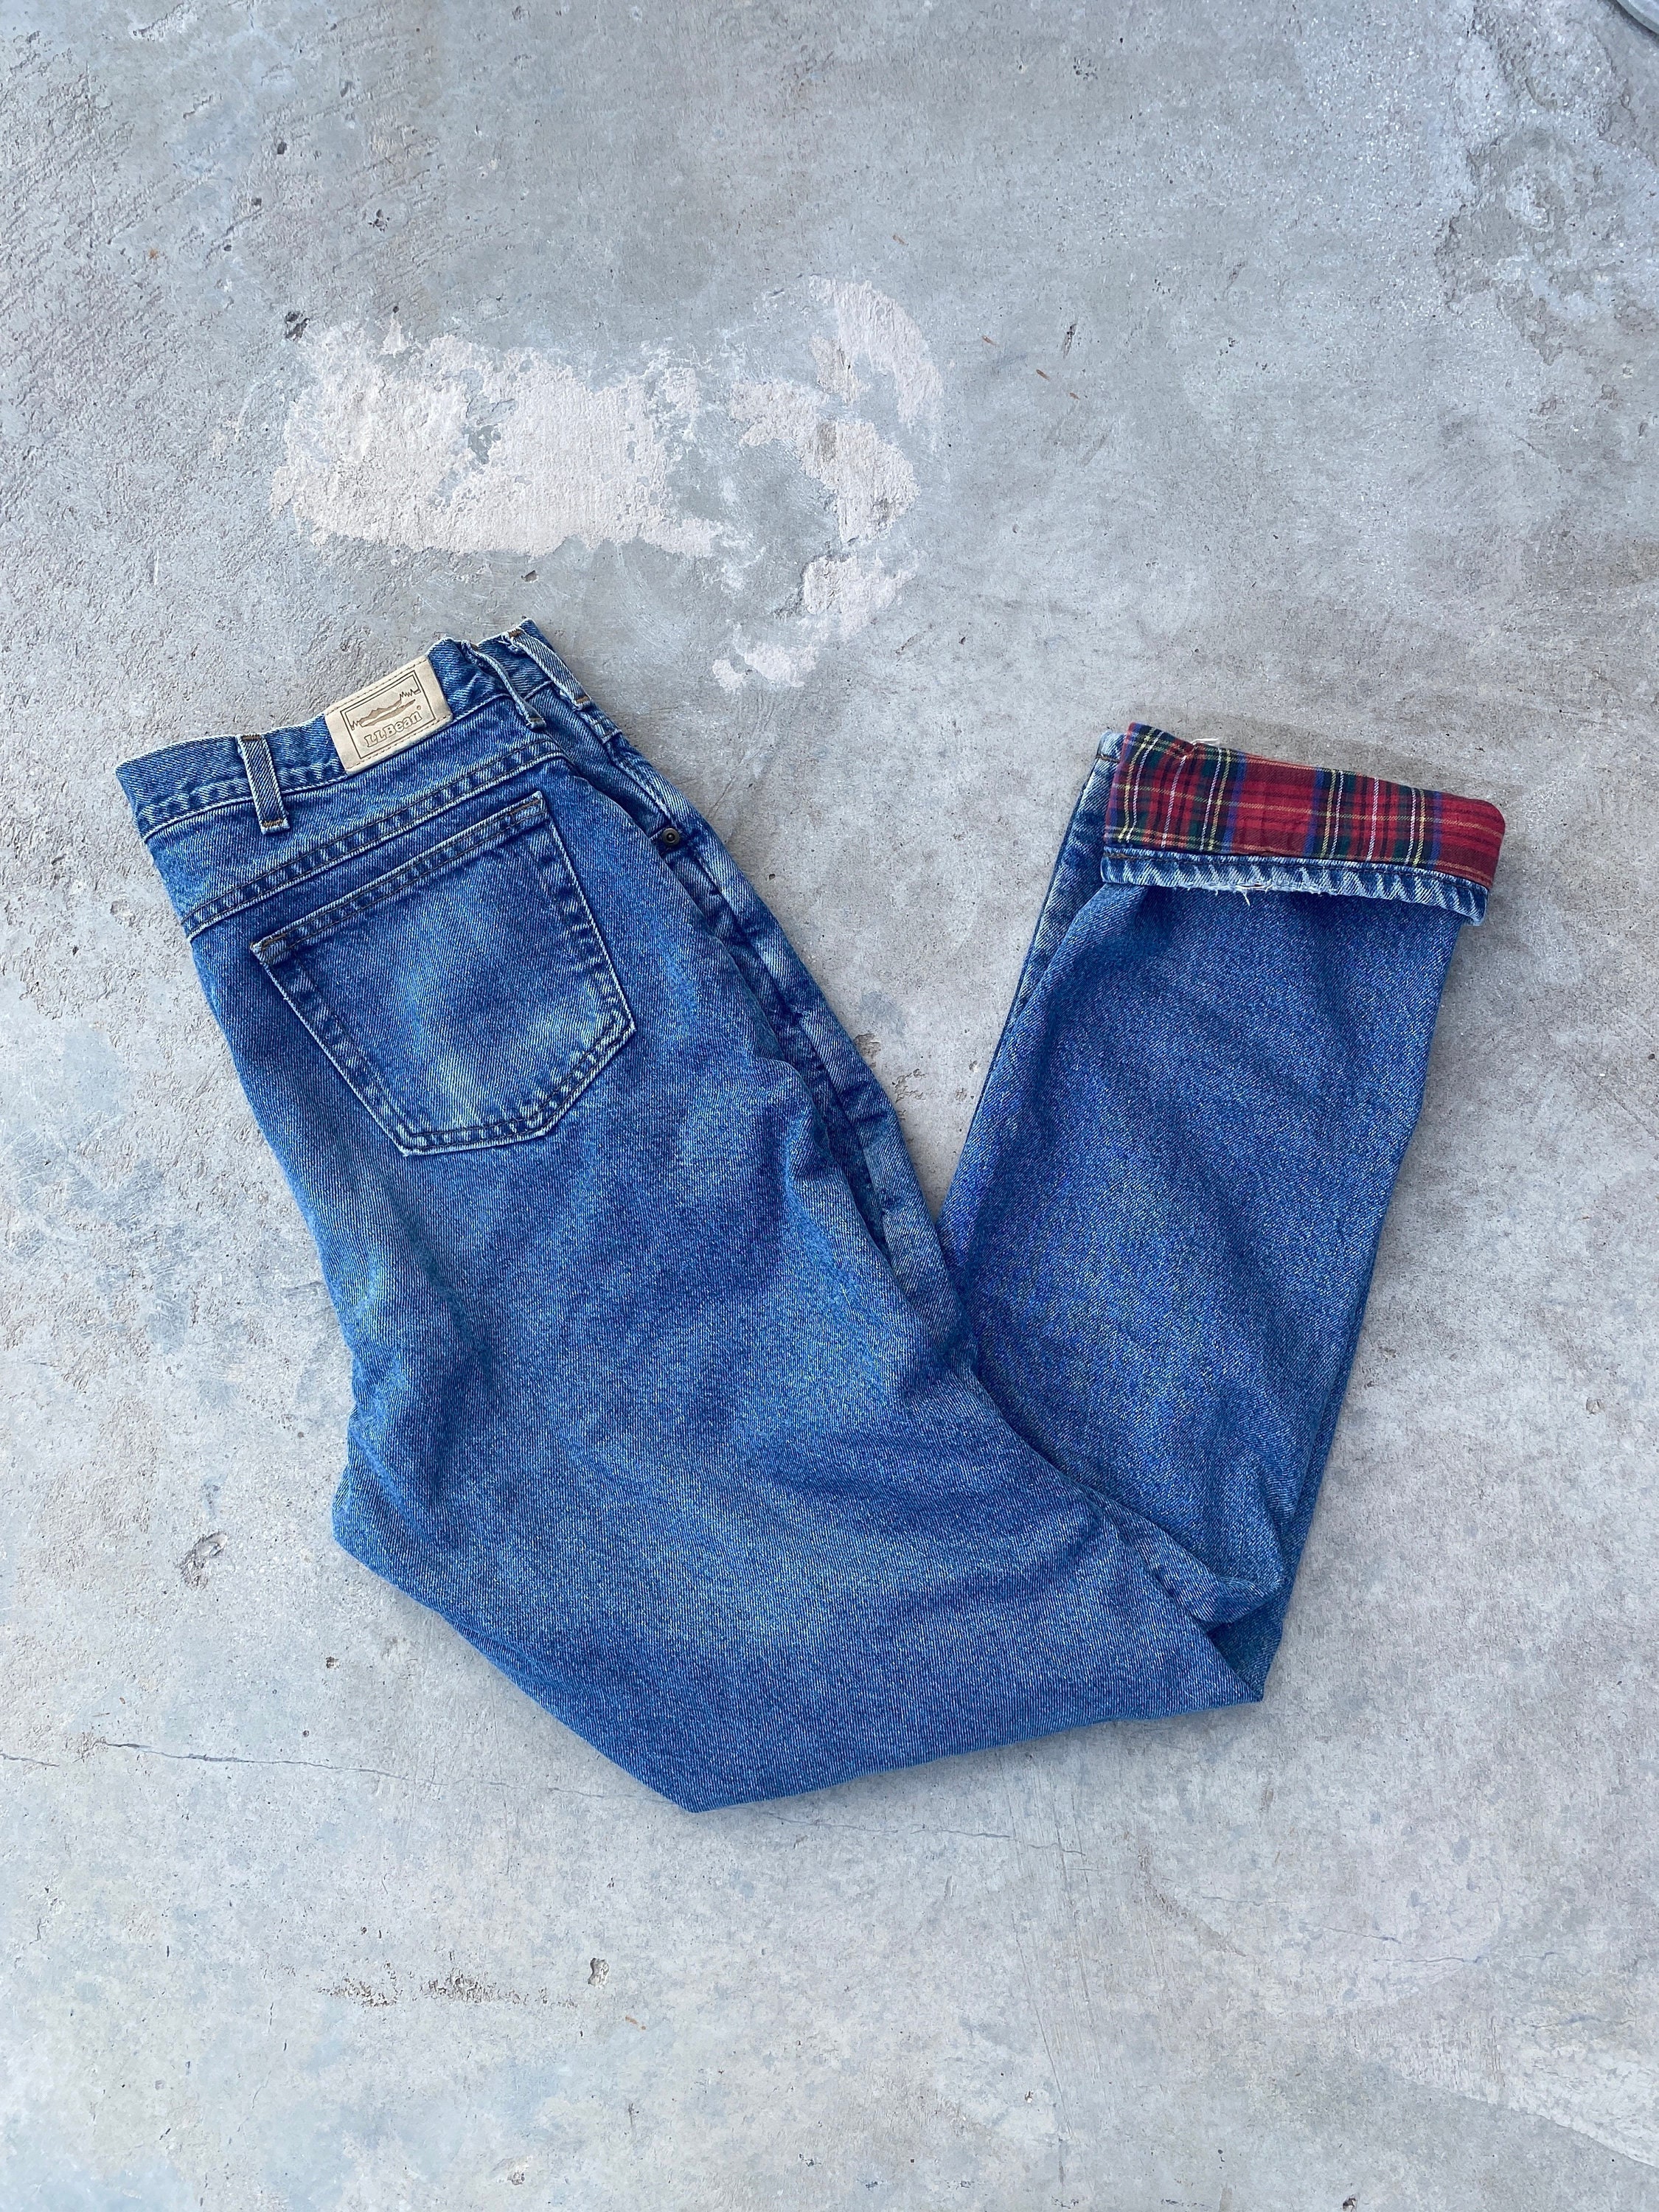 Flannel Lined Jeans -  Canada